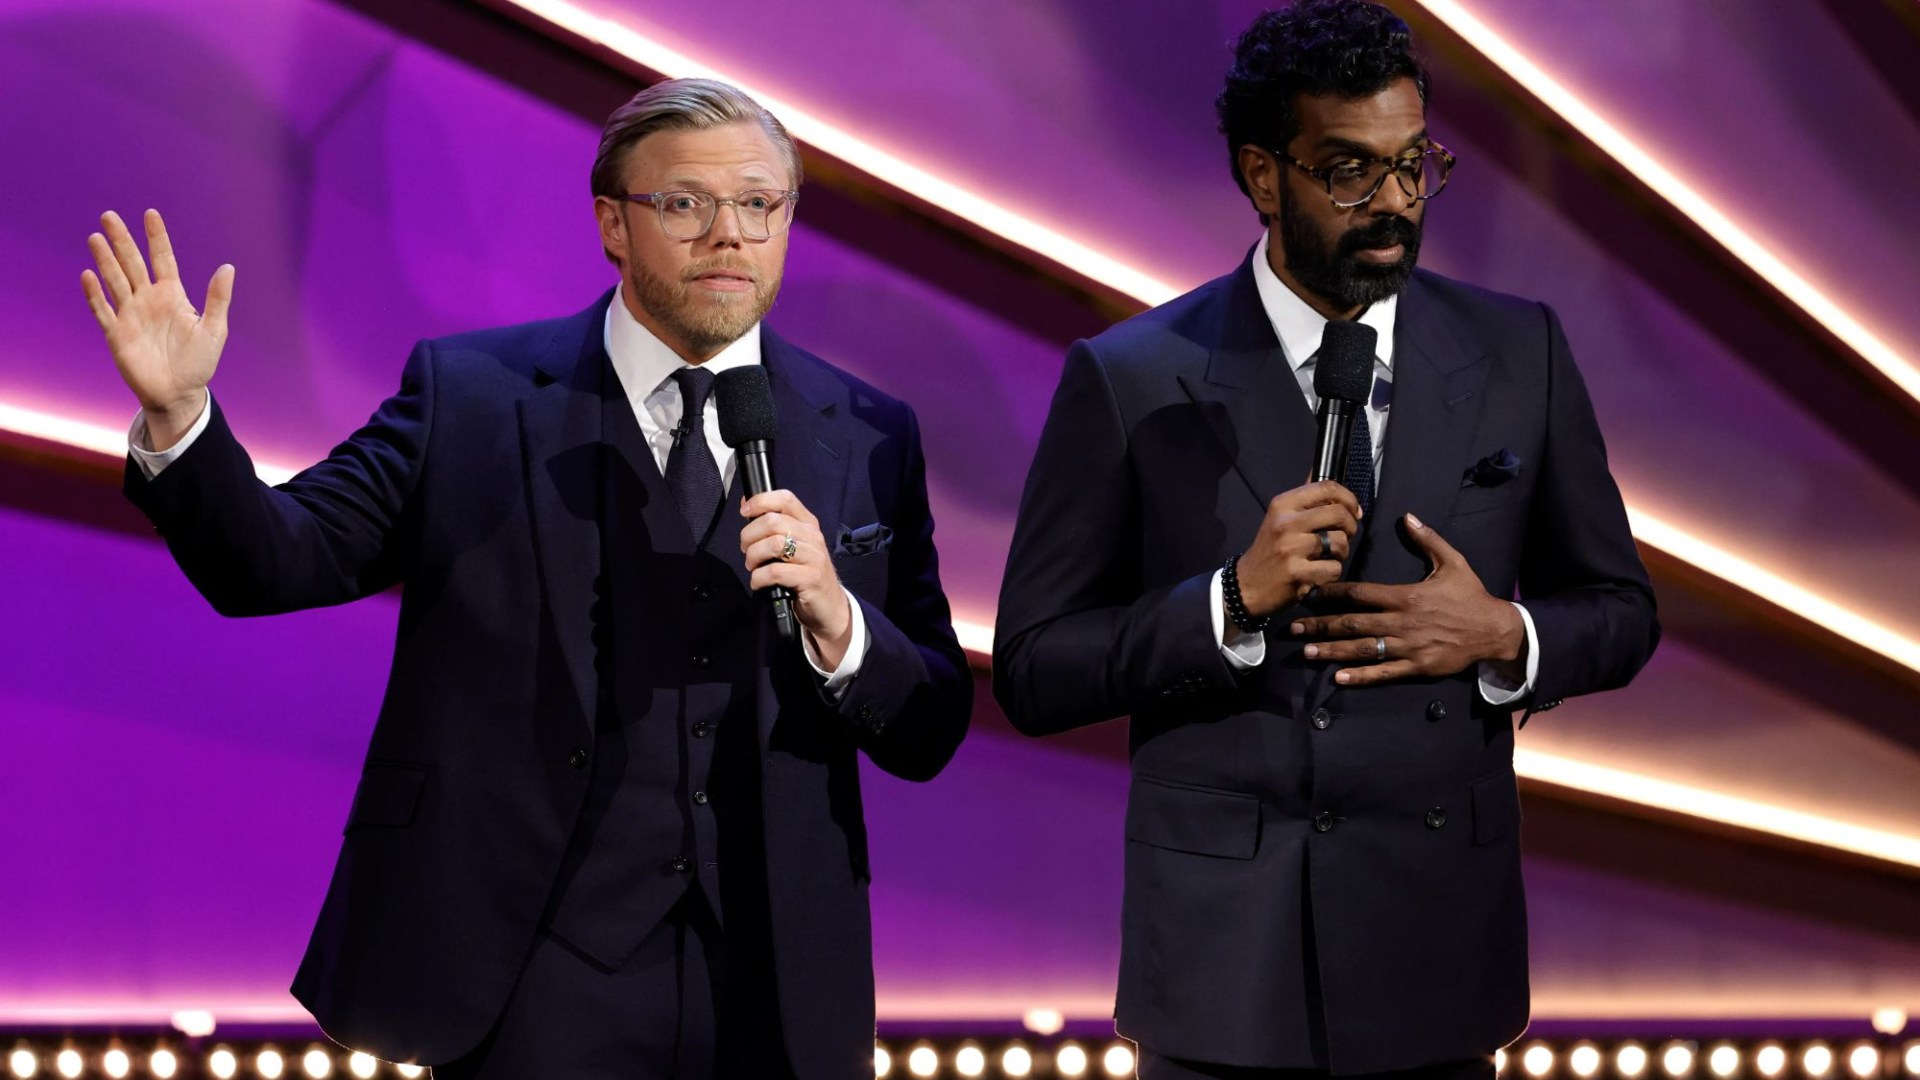 Bafta hosts Rob Beckett and Romesh Ranganathan spark feud with TV star as they kick off show with series of shock gags [Video]